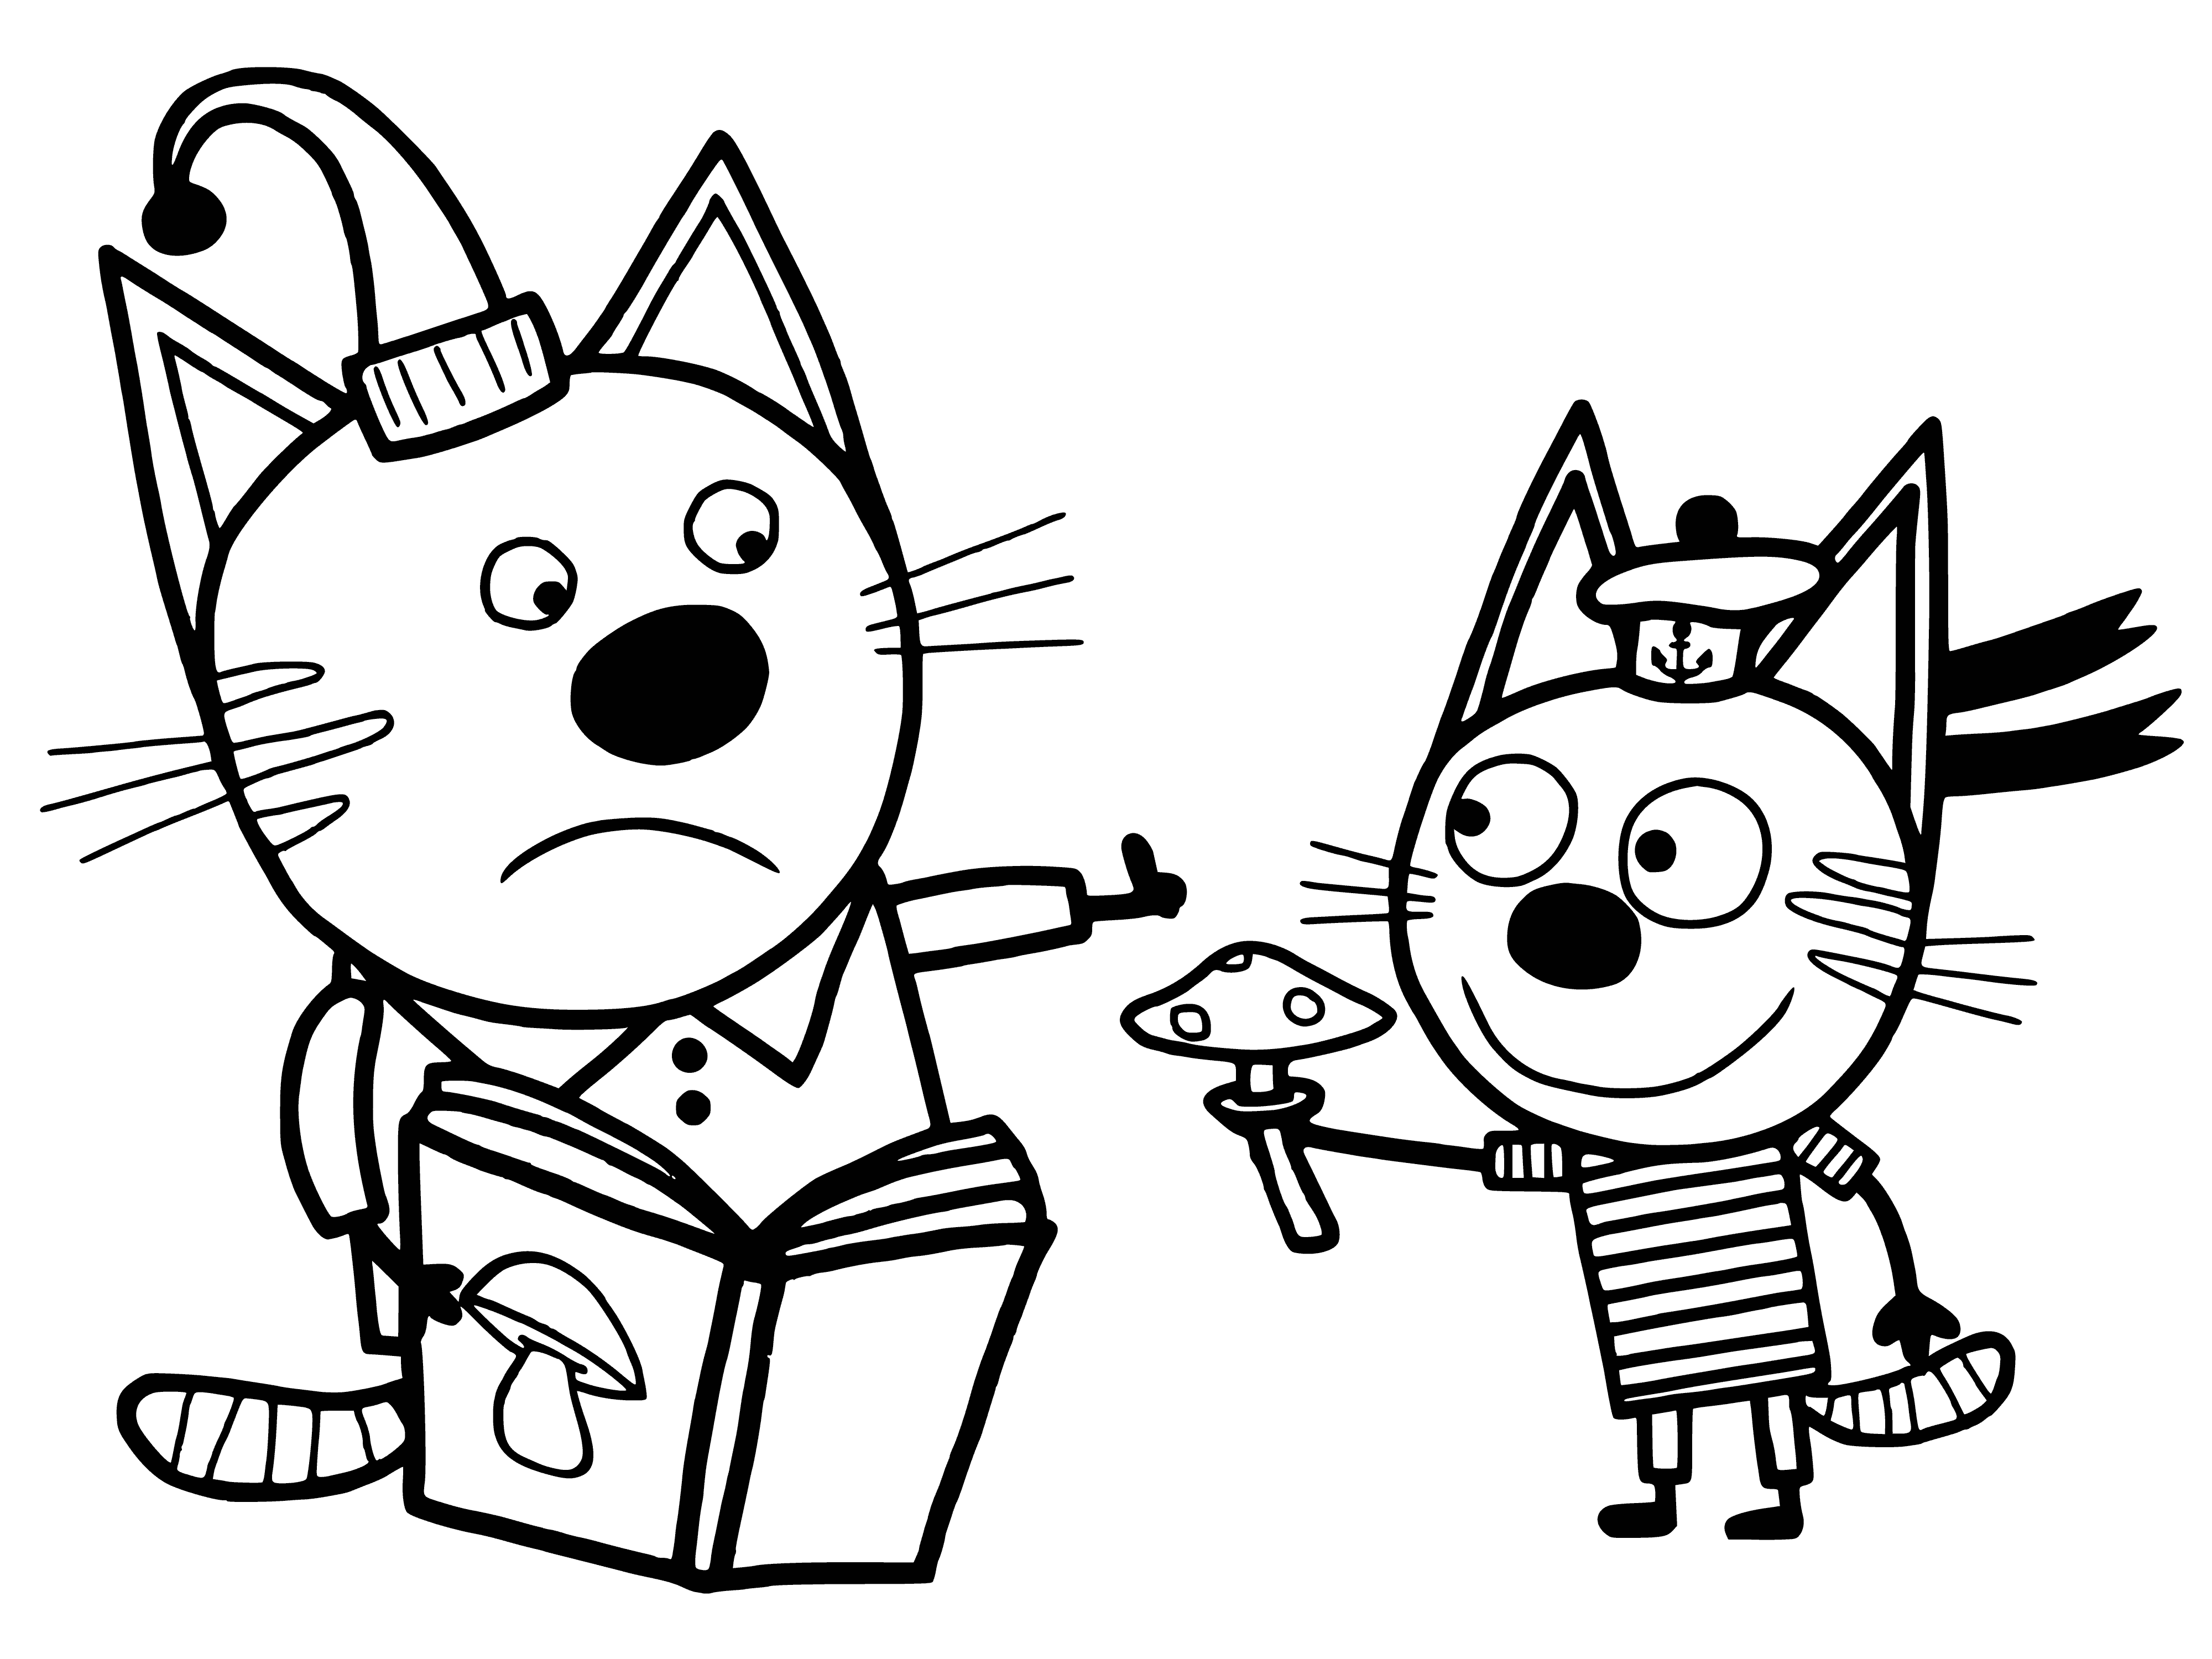 coloring page: Three cats: one large, two small; each have different color eyes & white saddle marking; playing with yellow toy.